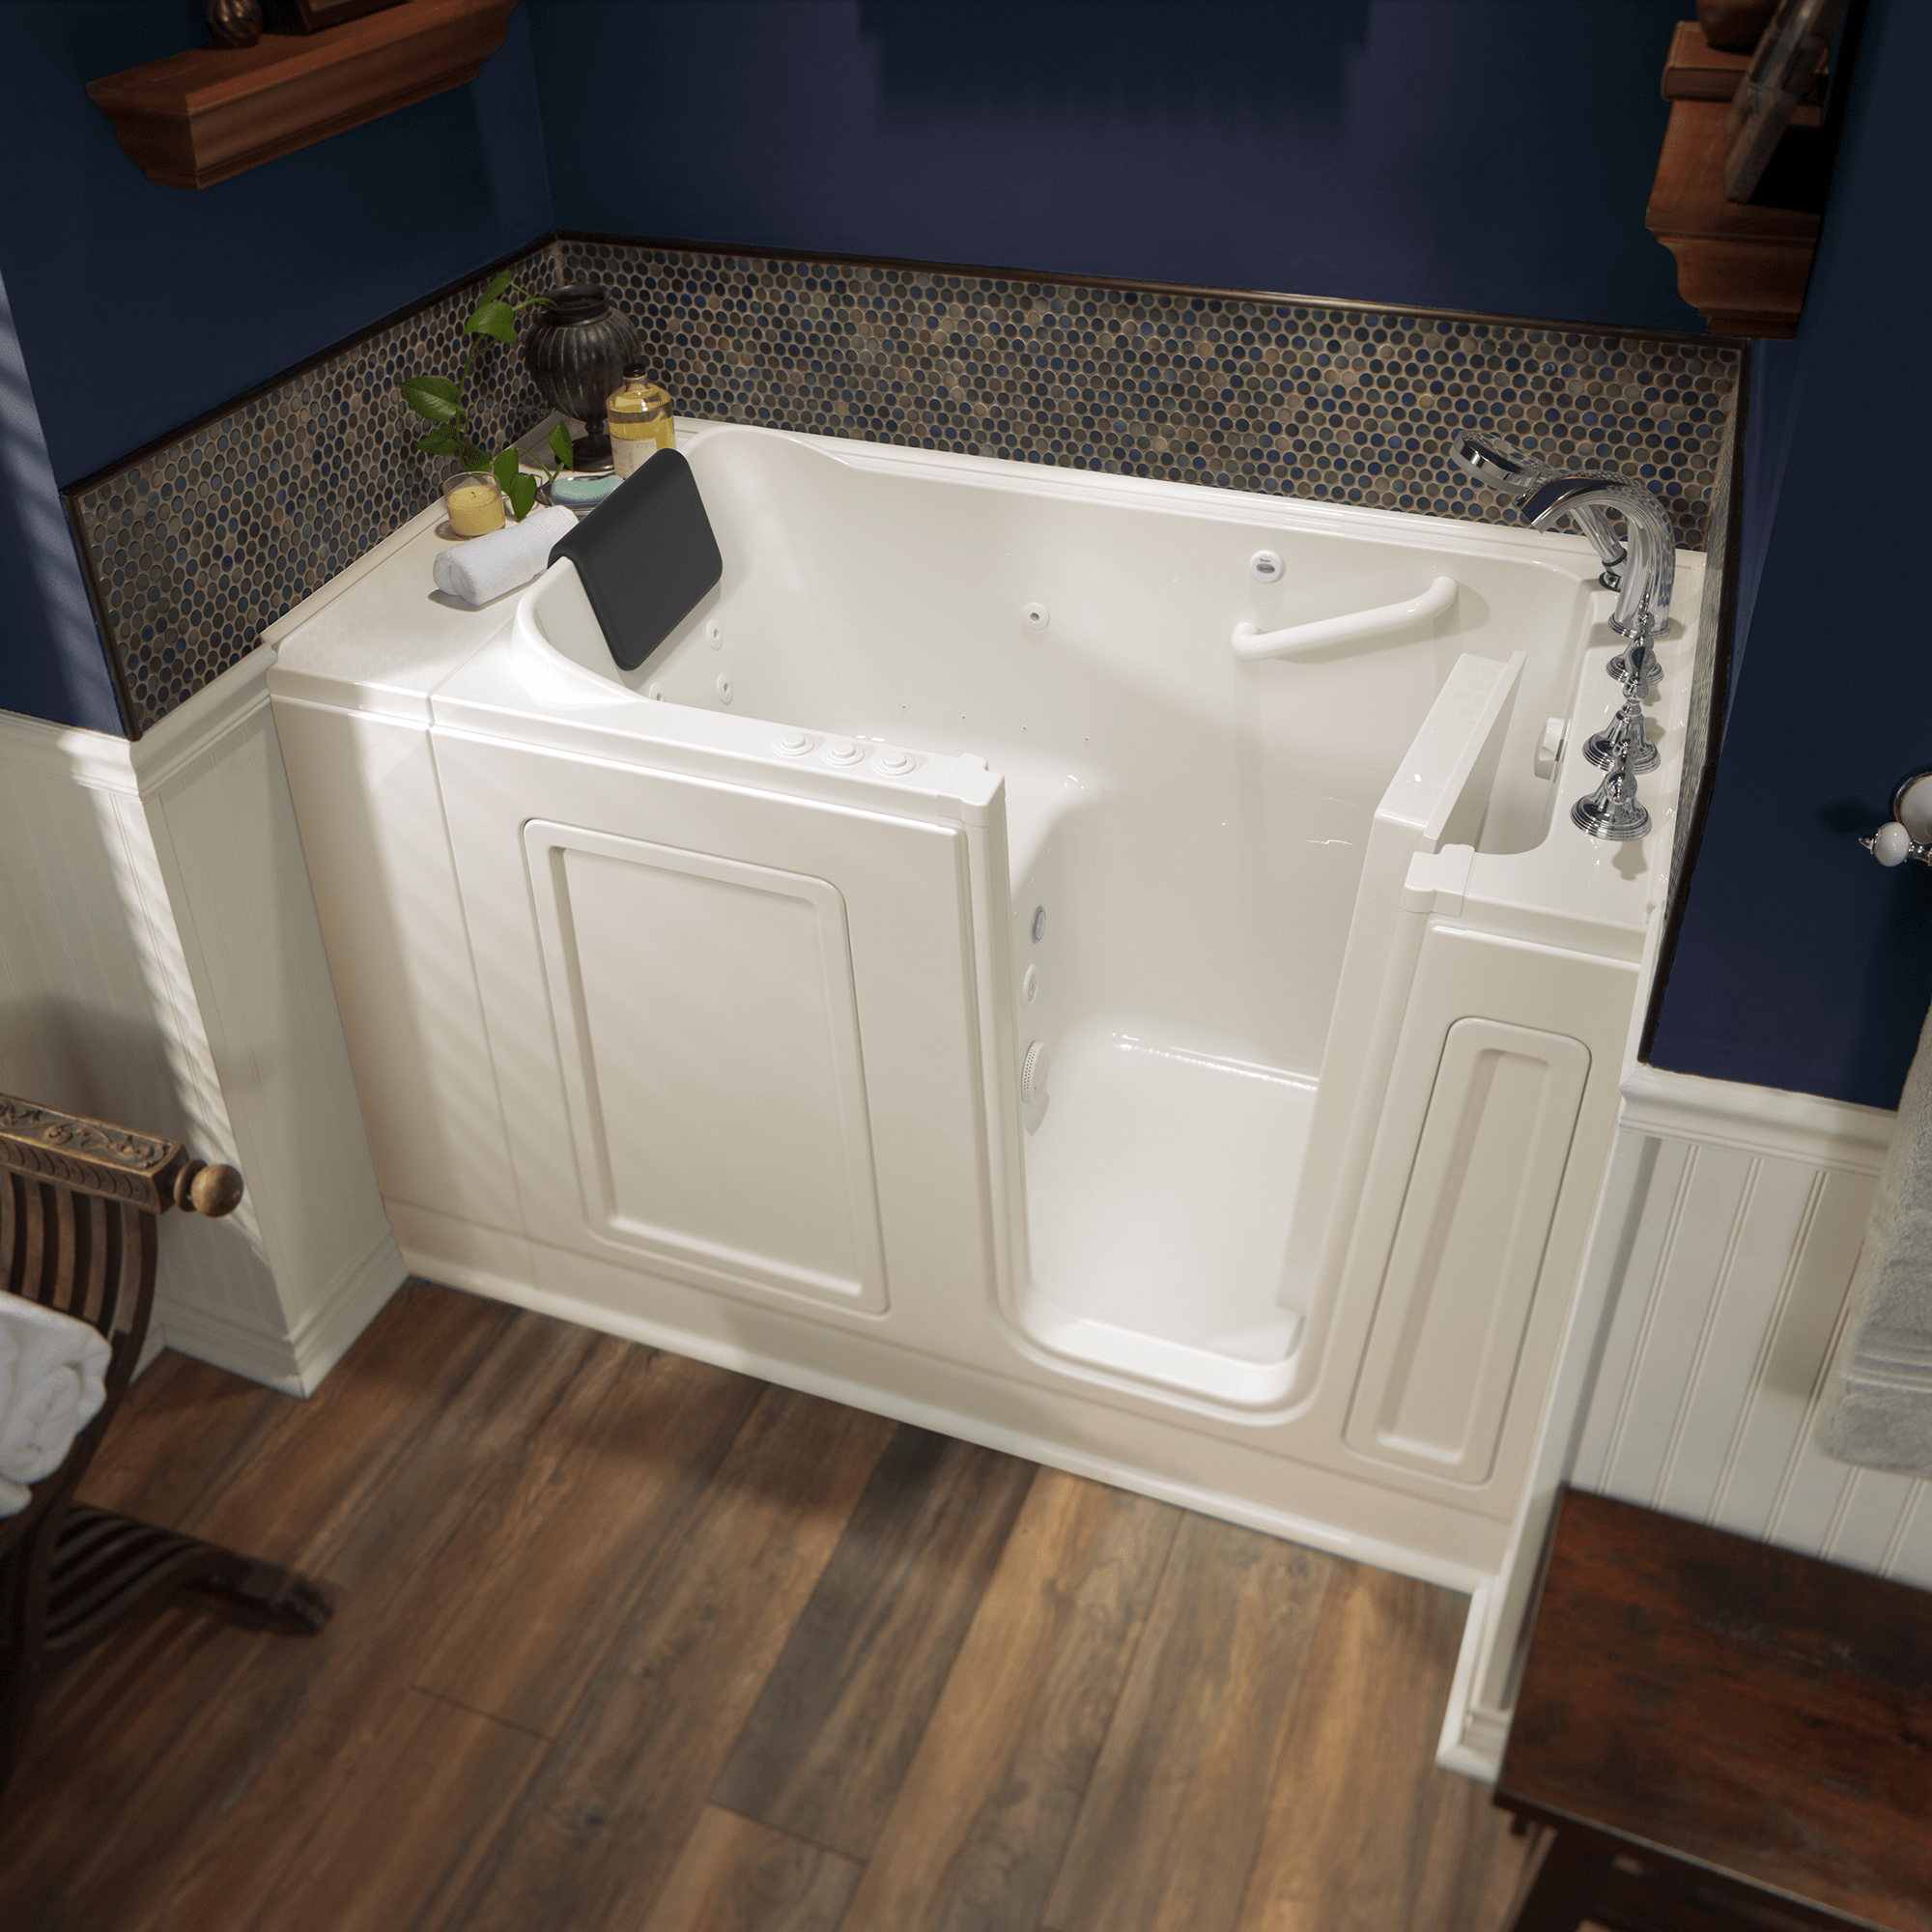 Acrylic Luxury Series 30 x 51 -Inch Walk-in Tub With Combination Air Spa and Whirlpool Systems - Right-Hand Drain With Faucet